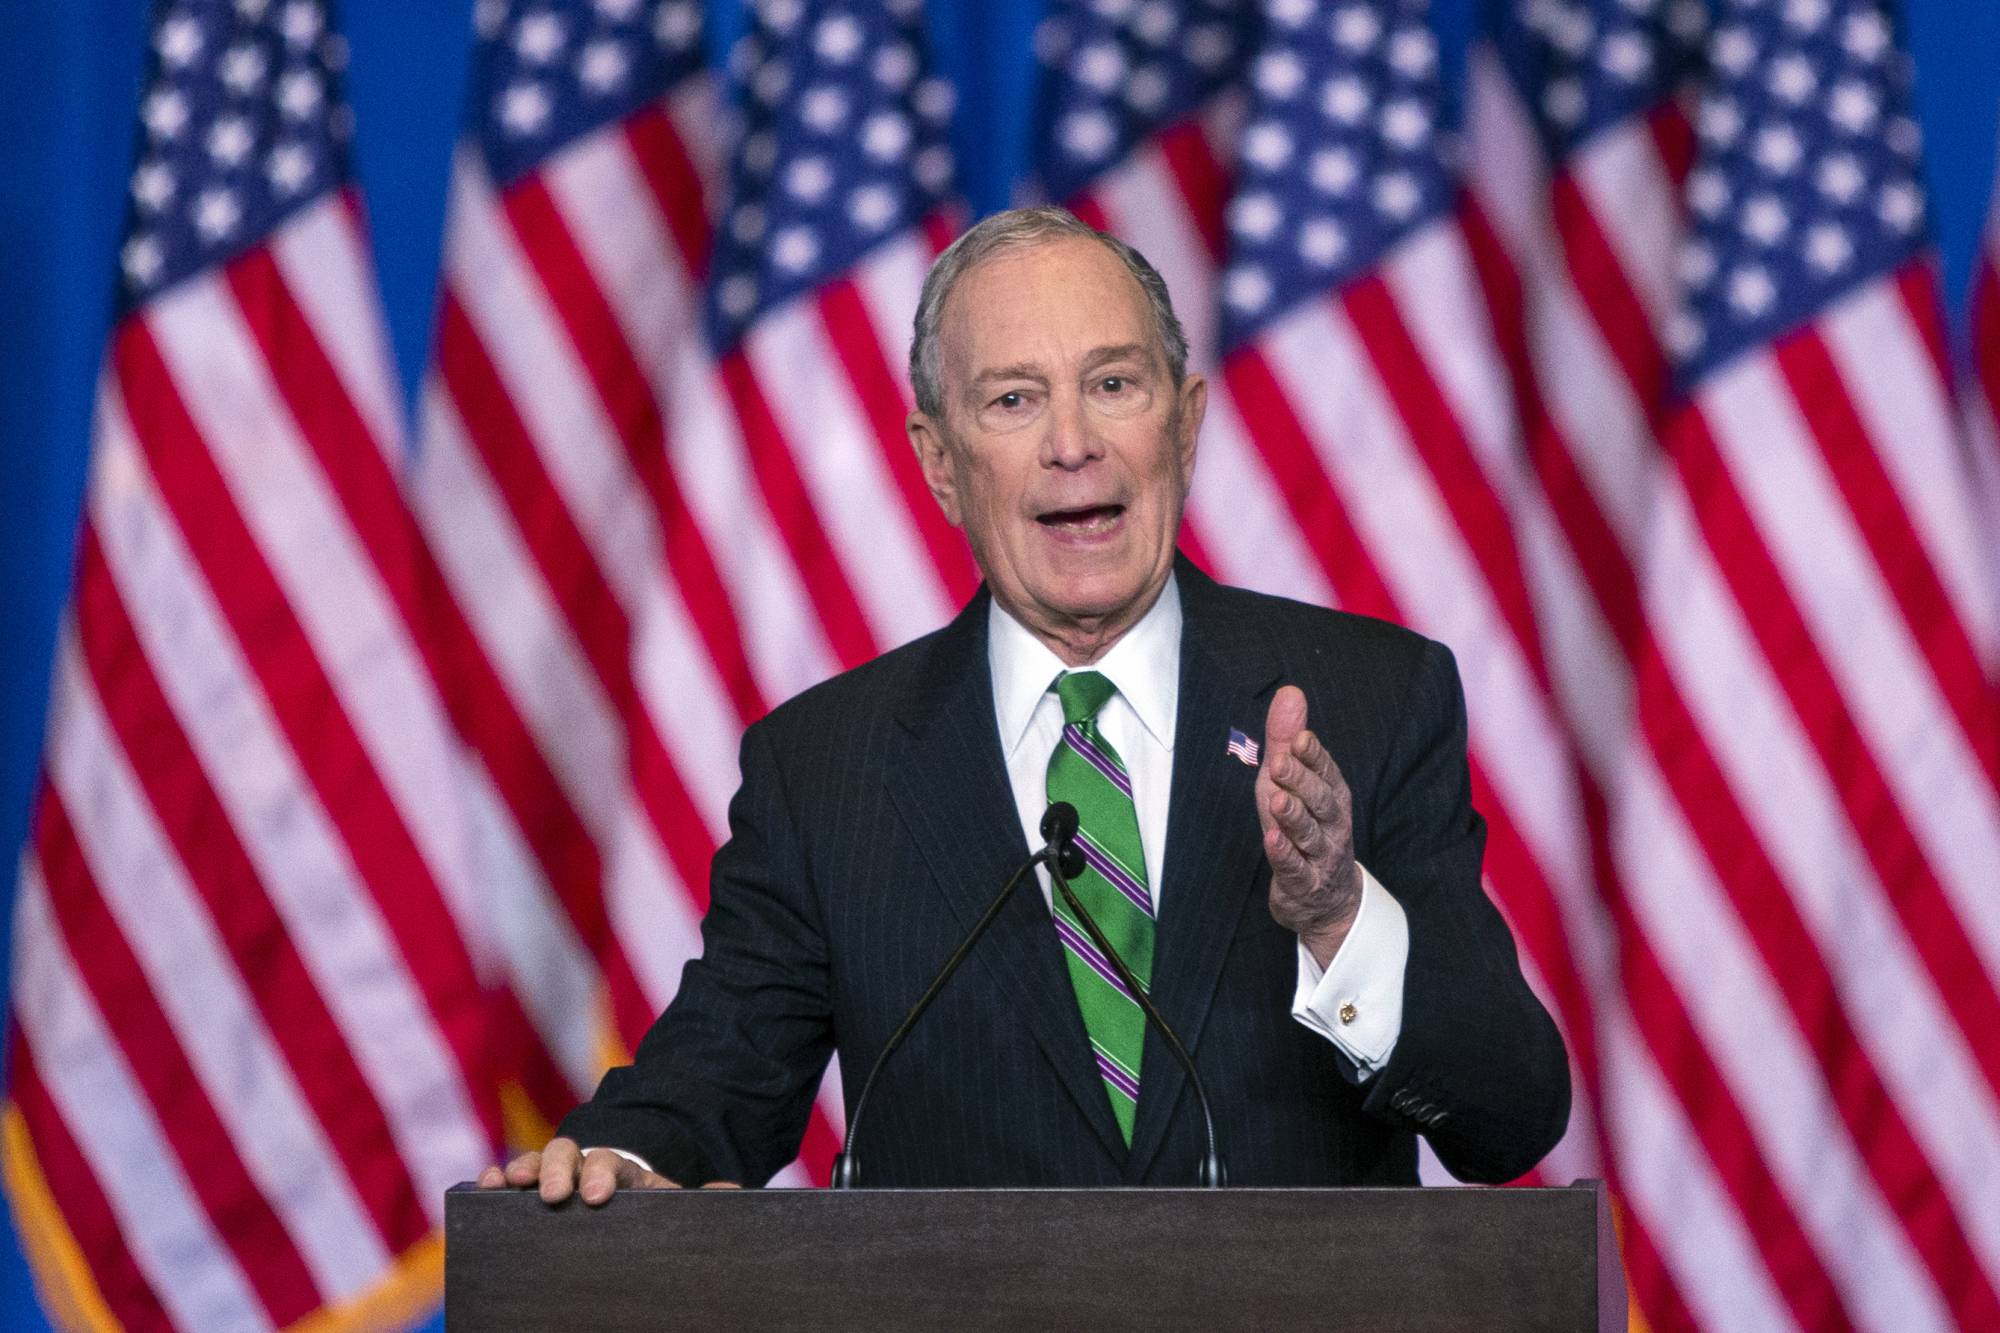 Former Democratic presidential candidate Mike Bloomberg speaks to supporters as he announces the suspension of his campaign and his endorsement of former Vice President Joe Biden for president in New York Wednesday , March 4, 2020. (AP Photo/Eduardo Munoz Alvarez)